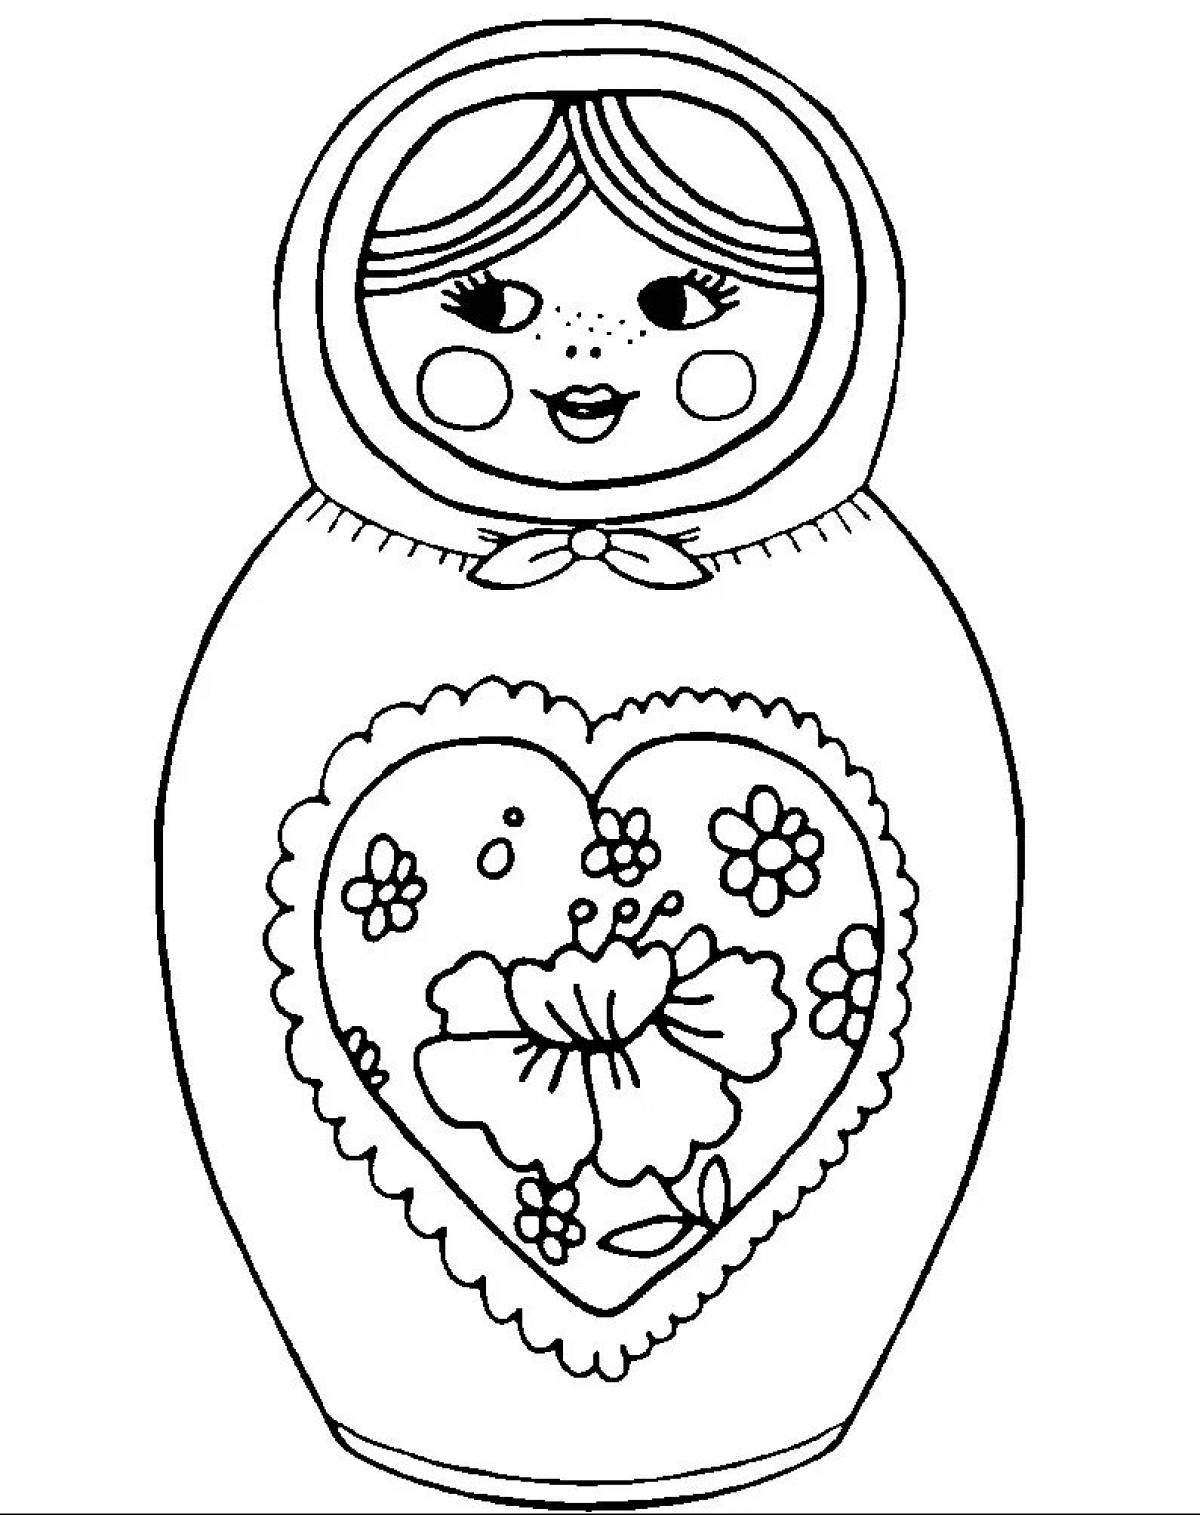 Russian doll for children #3